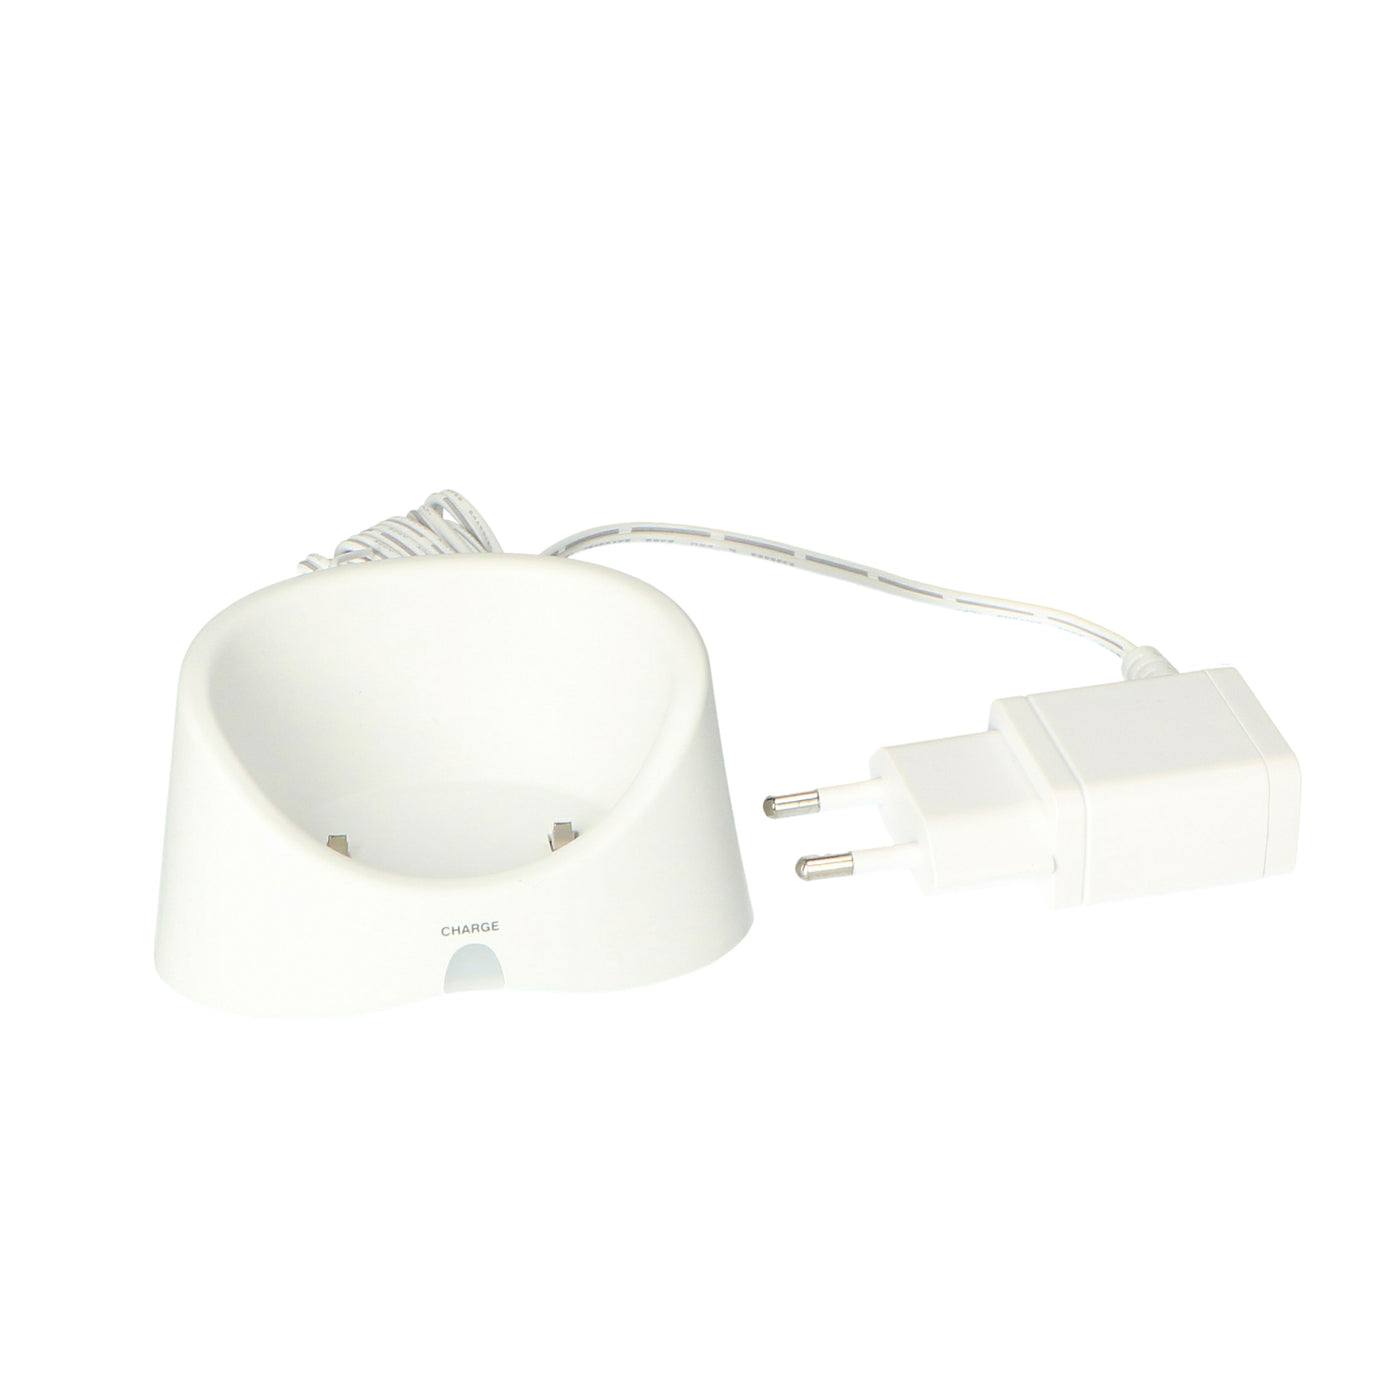 P002045 - Laadstation met adapter ouderunit DBX-88 ECO